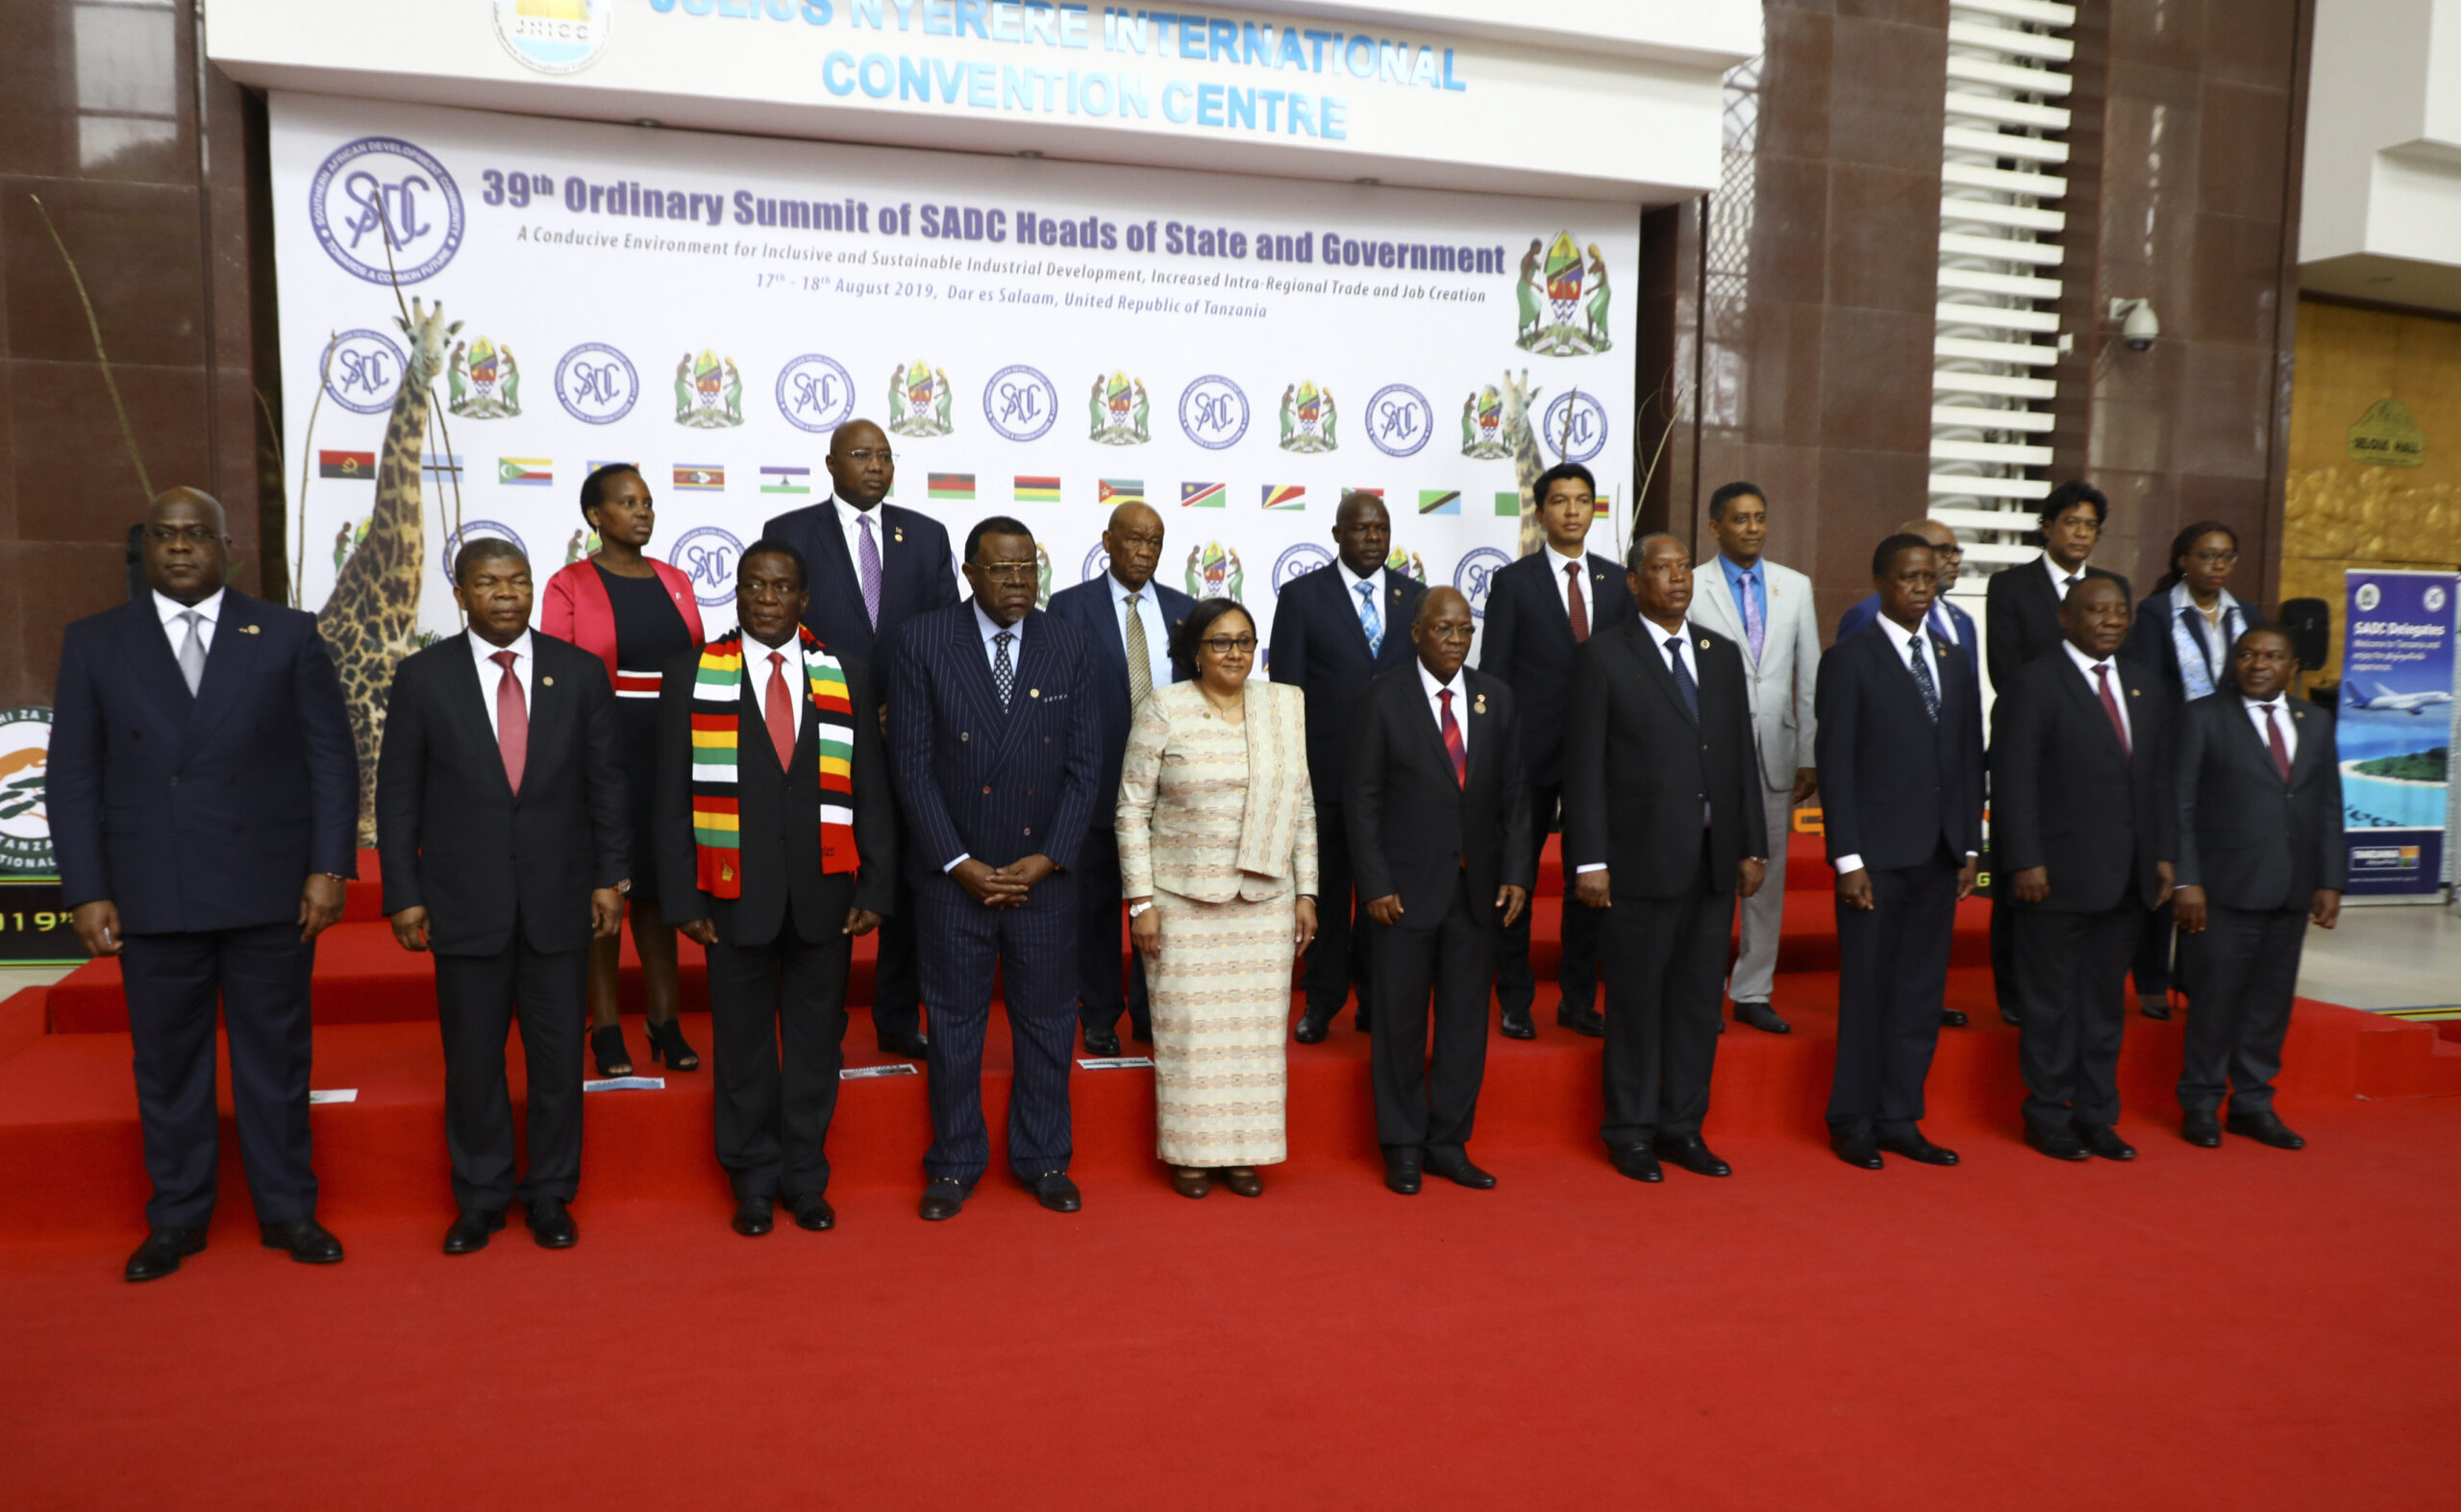 SADC leaders pose for a group photo the 2019 39th Ordinary Summit in Tanzania.Photo credit Xinhua